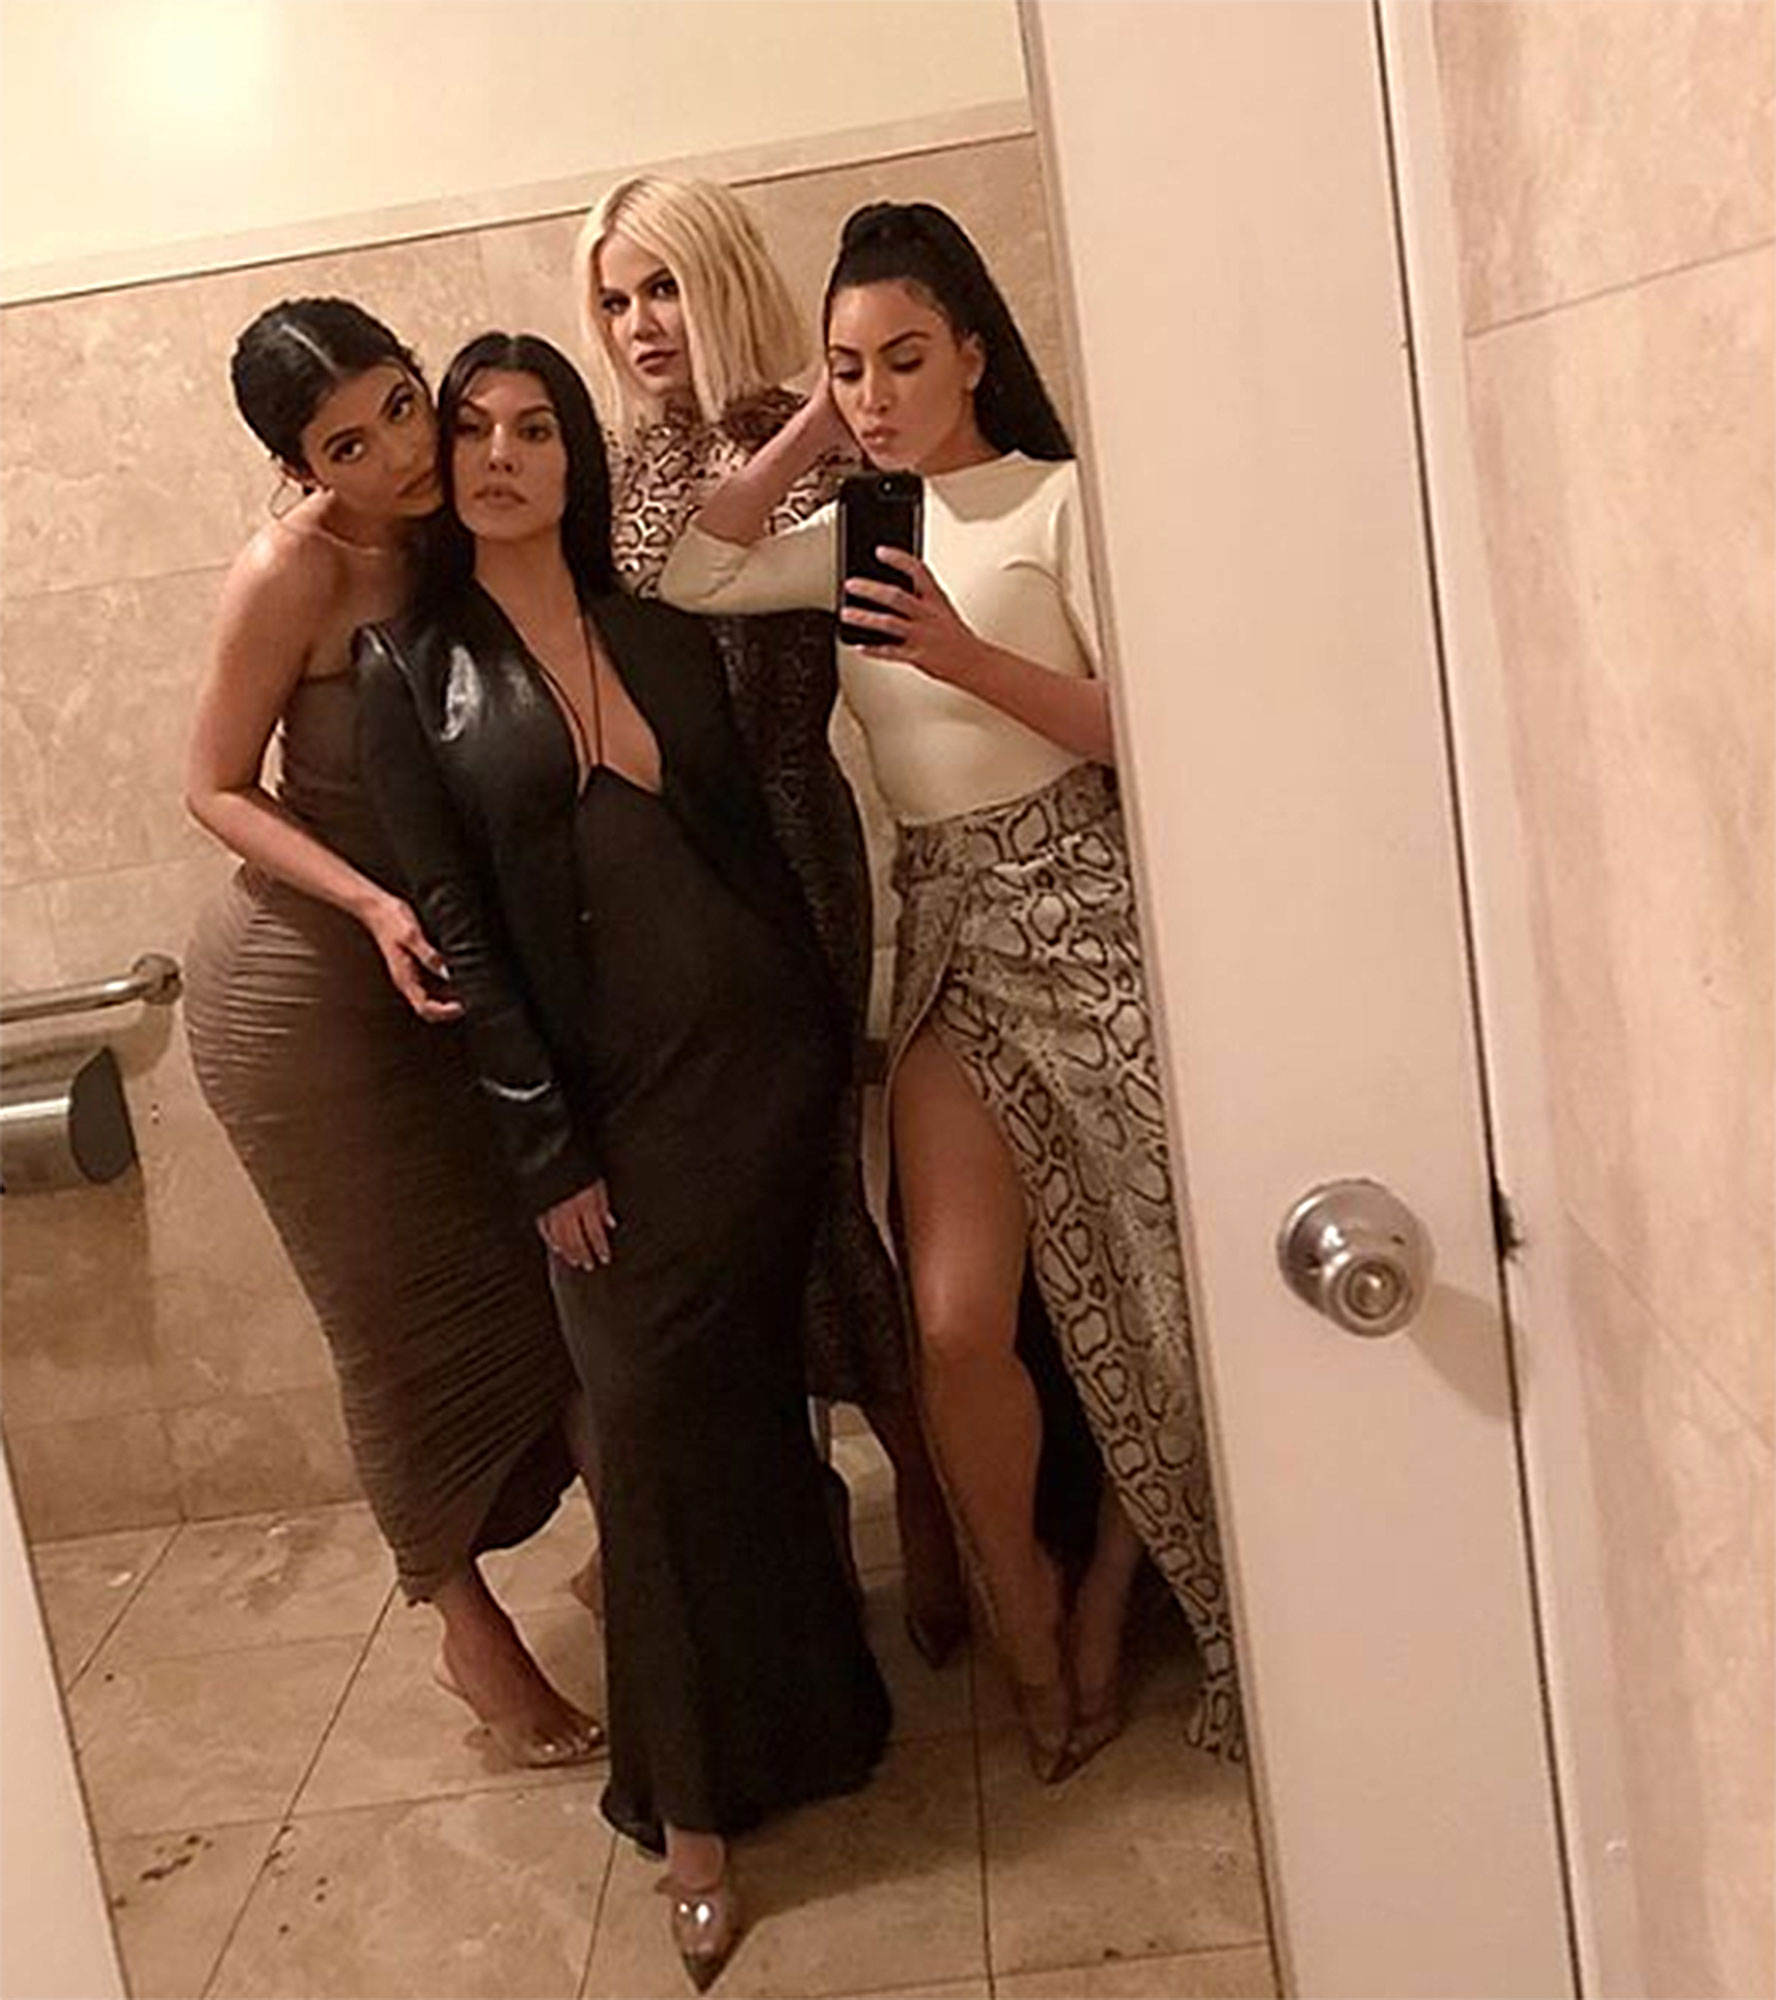 Khloe Kardashian Joins Sisters for Double Date Night Amid Drama Sex Image Hq